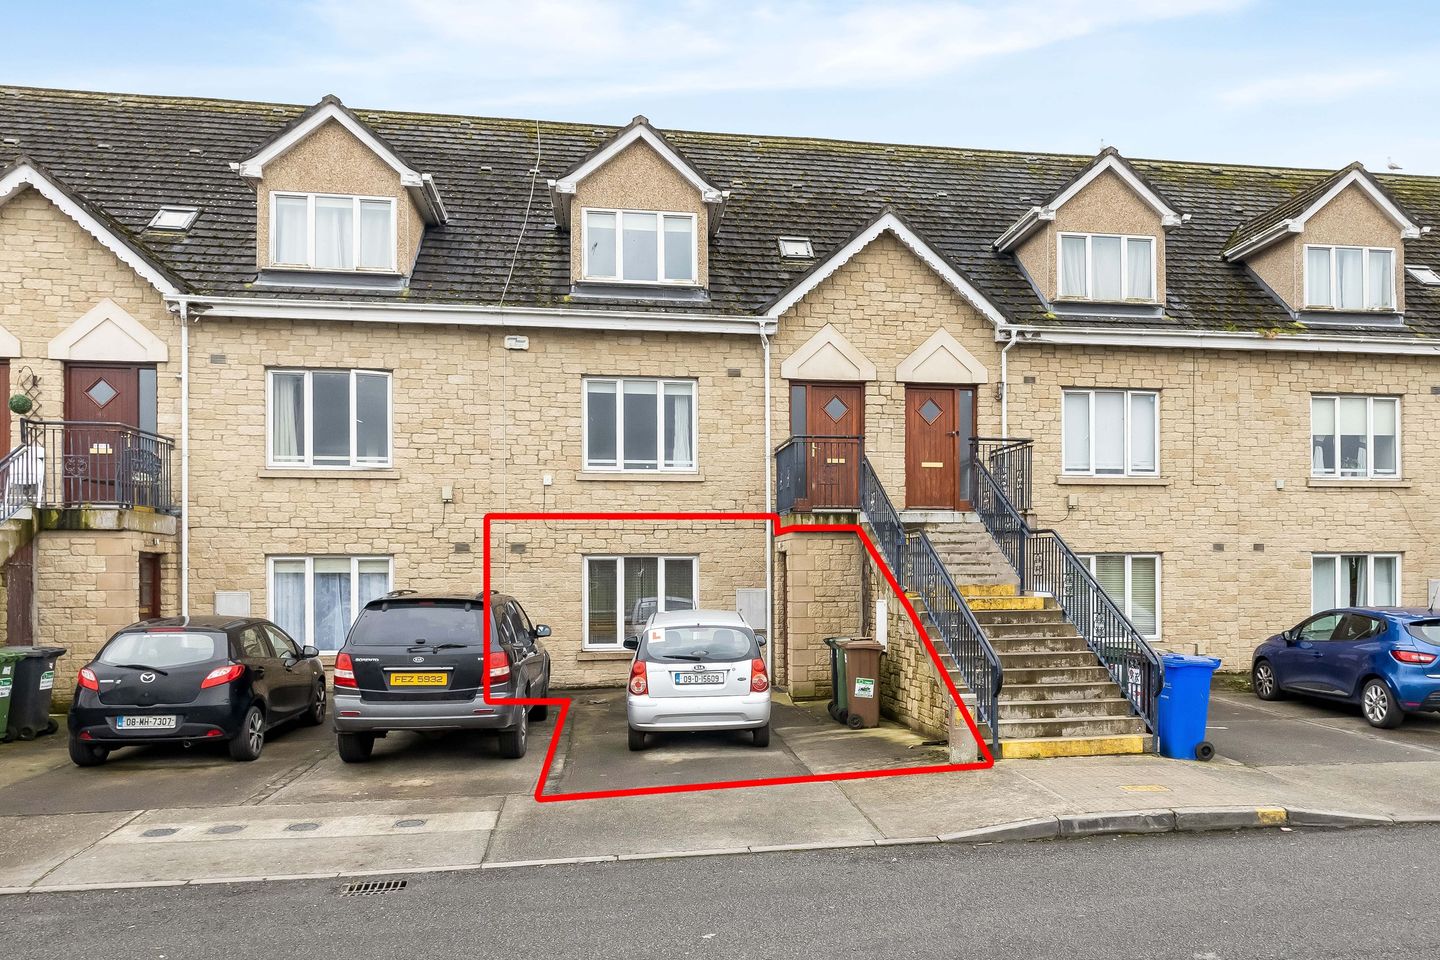 95 College Manor, Hoey's Lane, Dundalk, Co. Louth, A91DC93